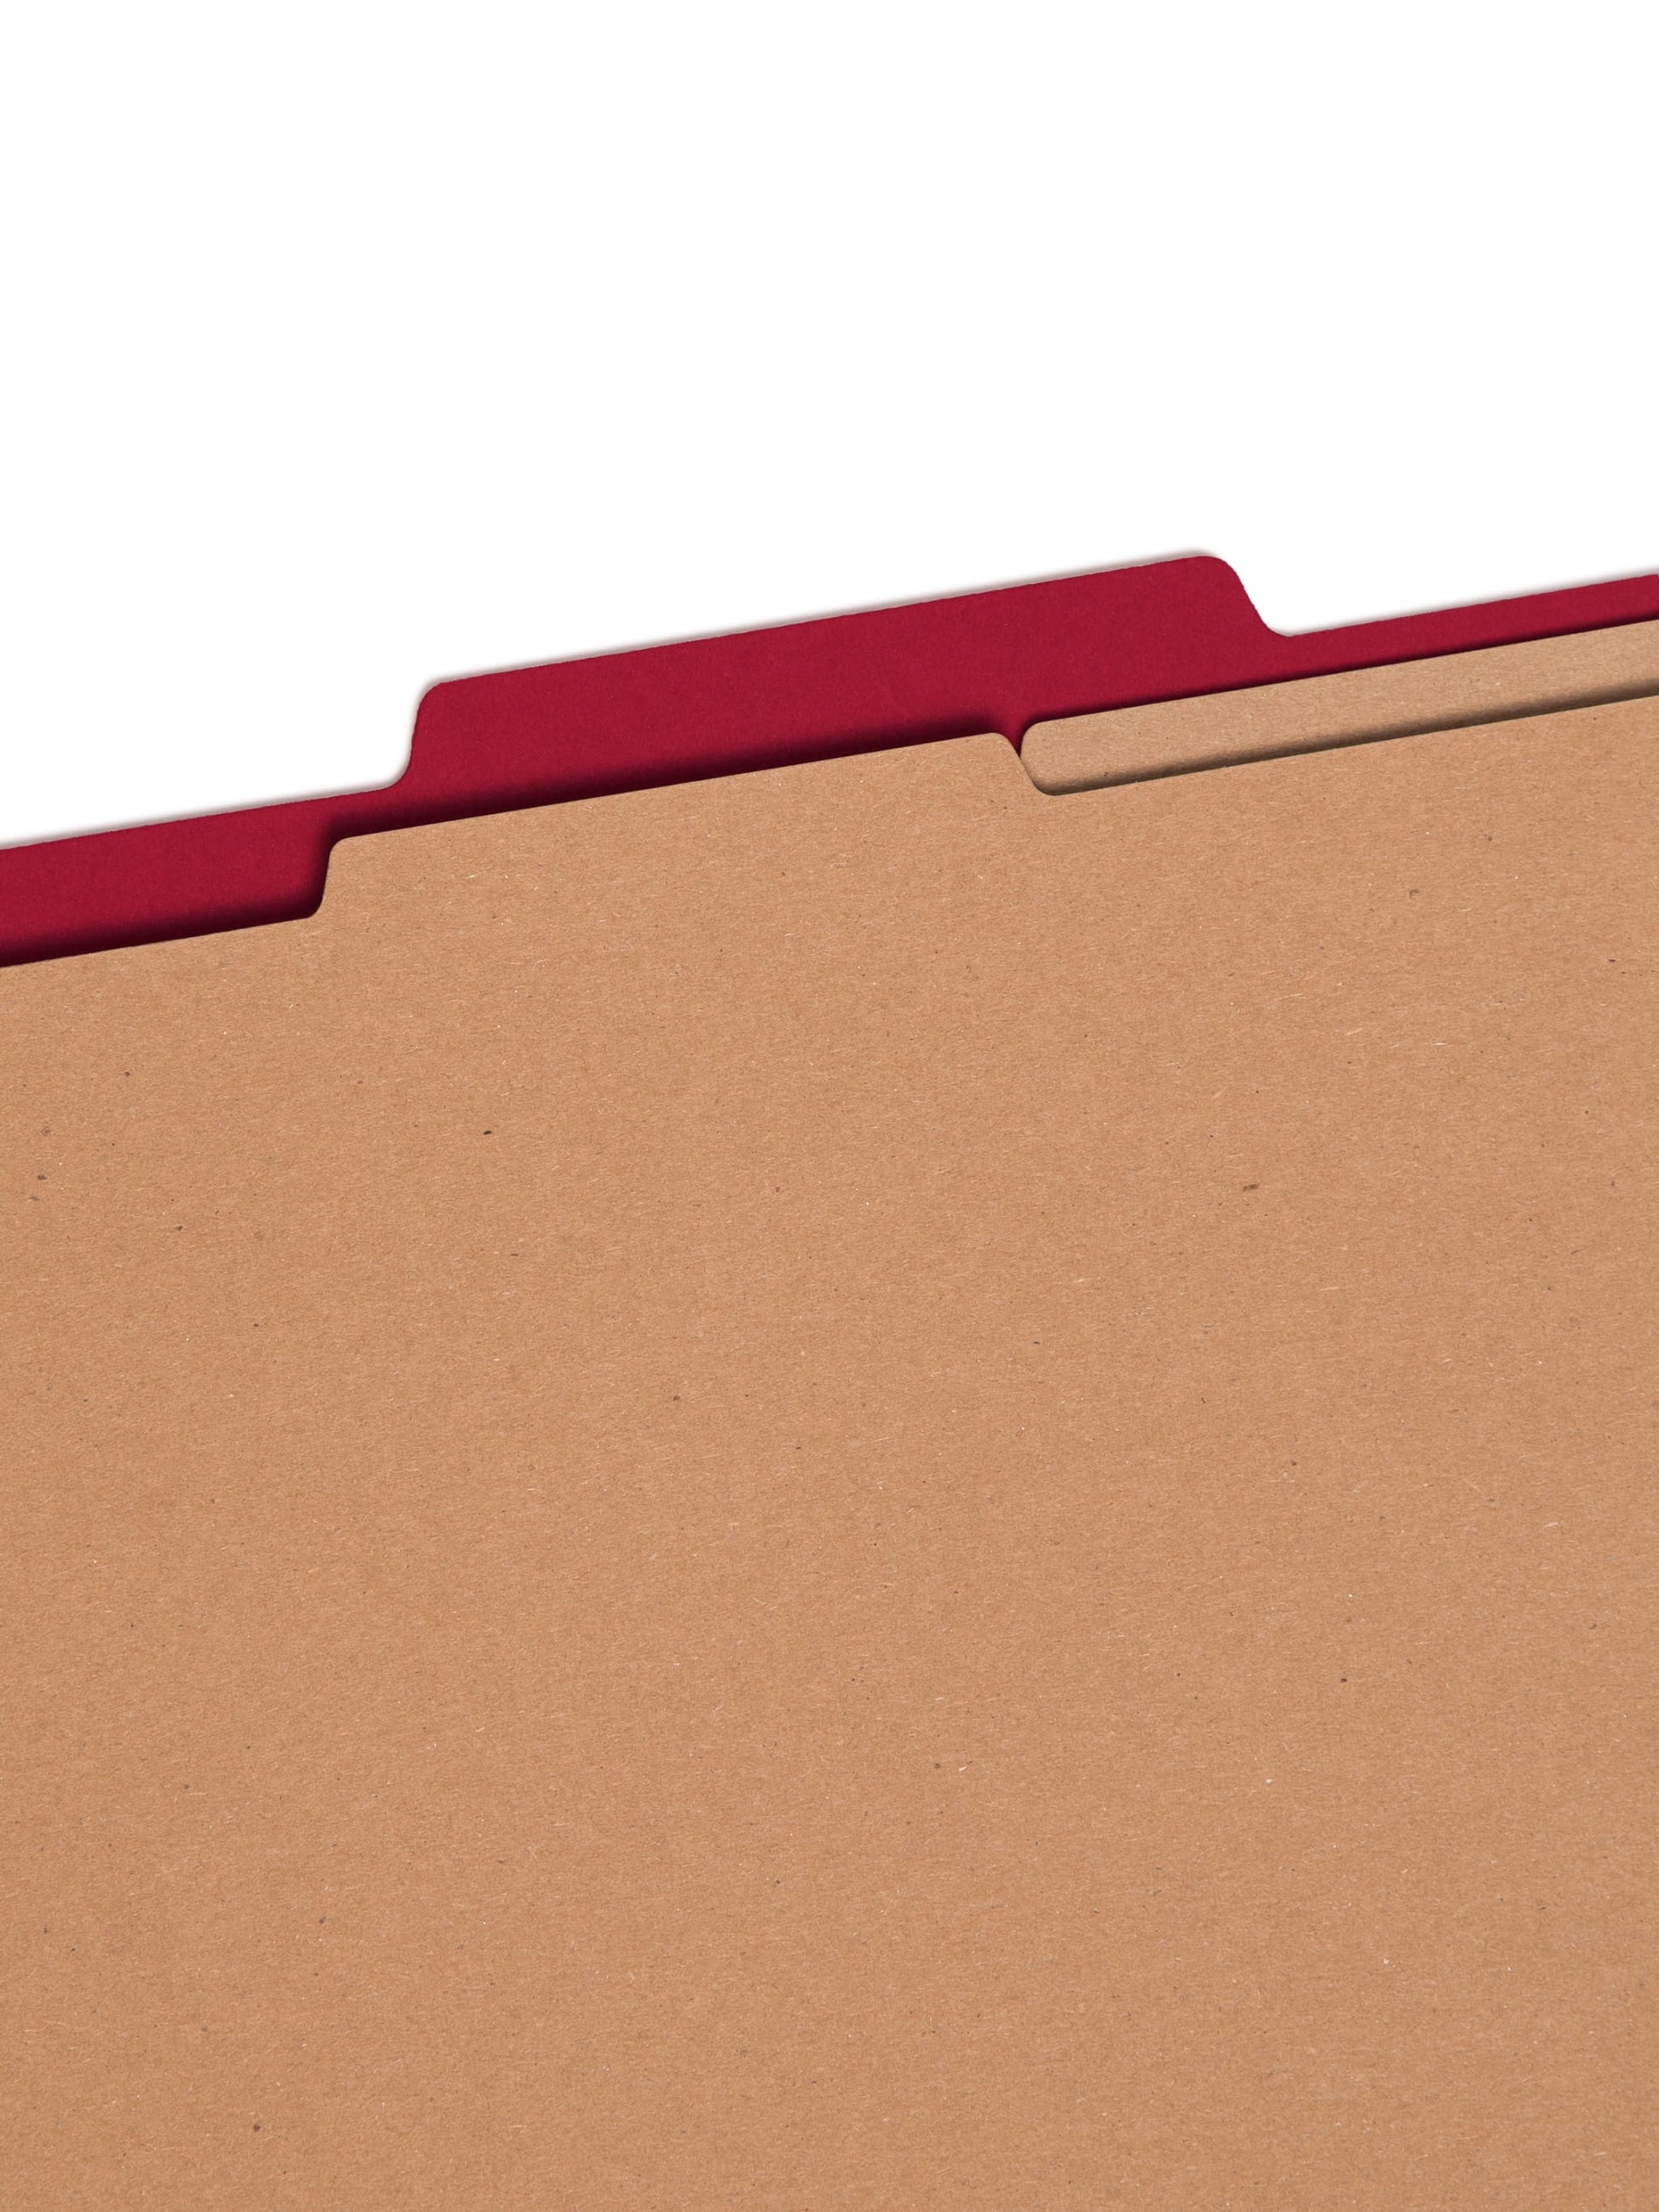 SafeSHIELD® Premium Pressboard Classification File Folders, 2 Dividers, 2 inch Expansion, 2/5-Cut Tab, Bright Red Color, Letter Size, Set of 0, 30086486142022